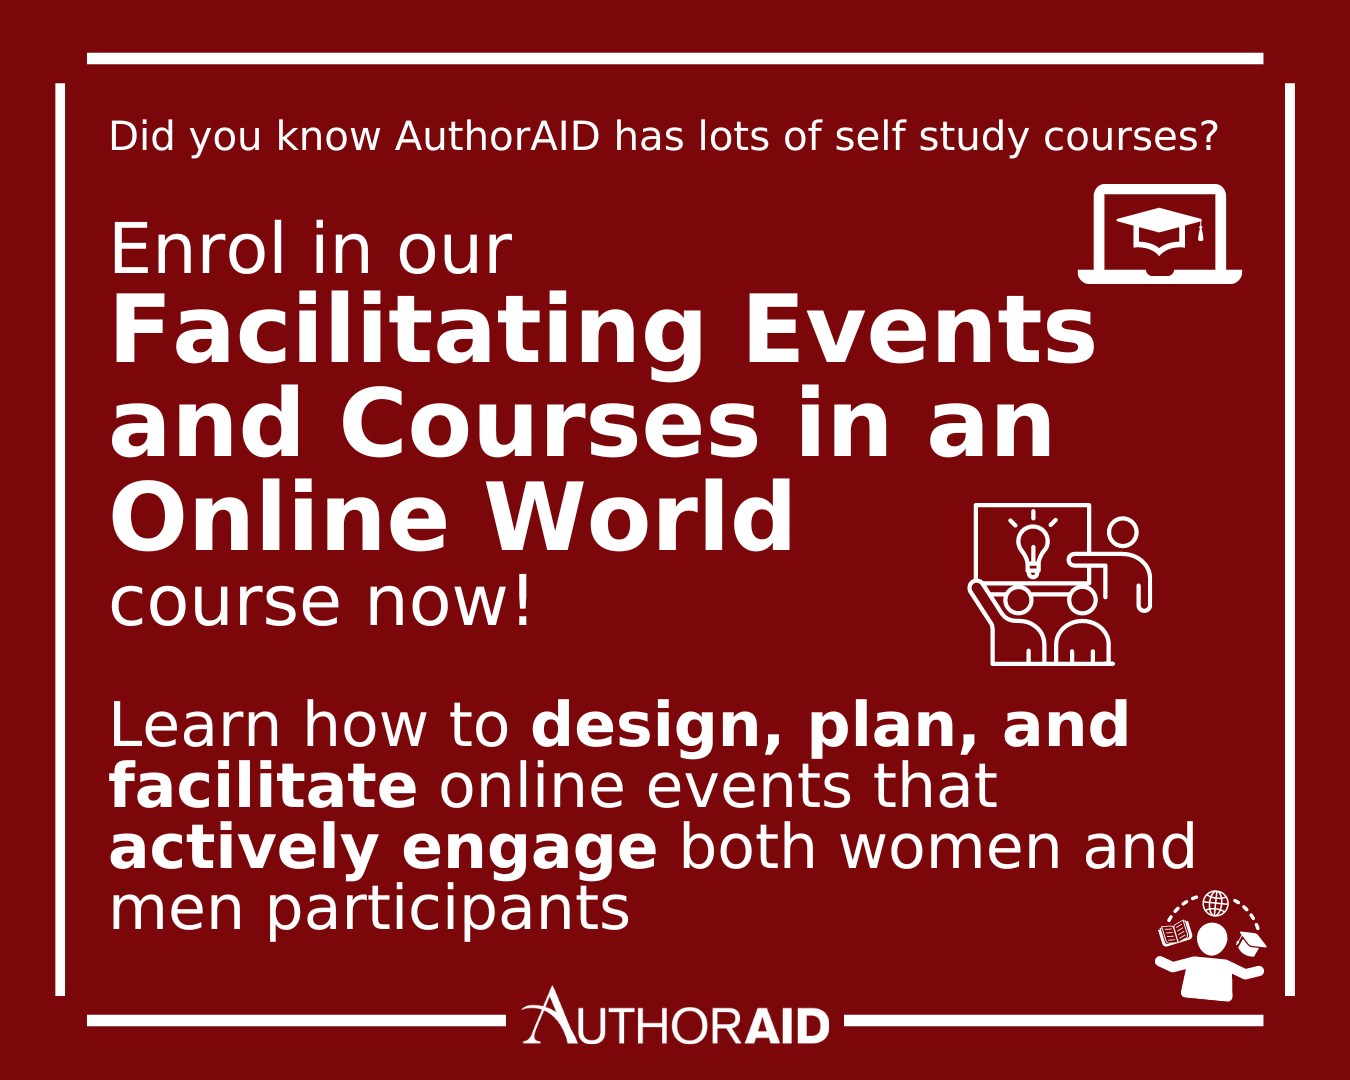 AuthorAID graphic - red background and all text in white. The AuthorAID logo is at the bottom, and a white straight border surrounds all the text. The text reads 'Did you know that AuthorAID has lots of self study course? Enrol in our Facilitating Events and Courses in an Online World course now! Learn how to design, plan, and facilitate online events that actively engage both women and men participants''